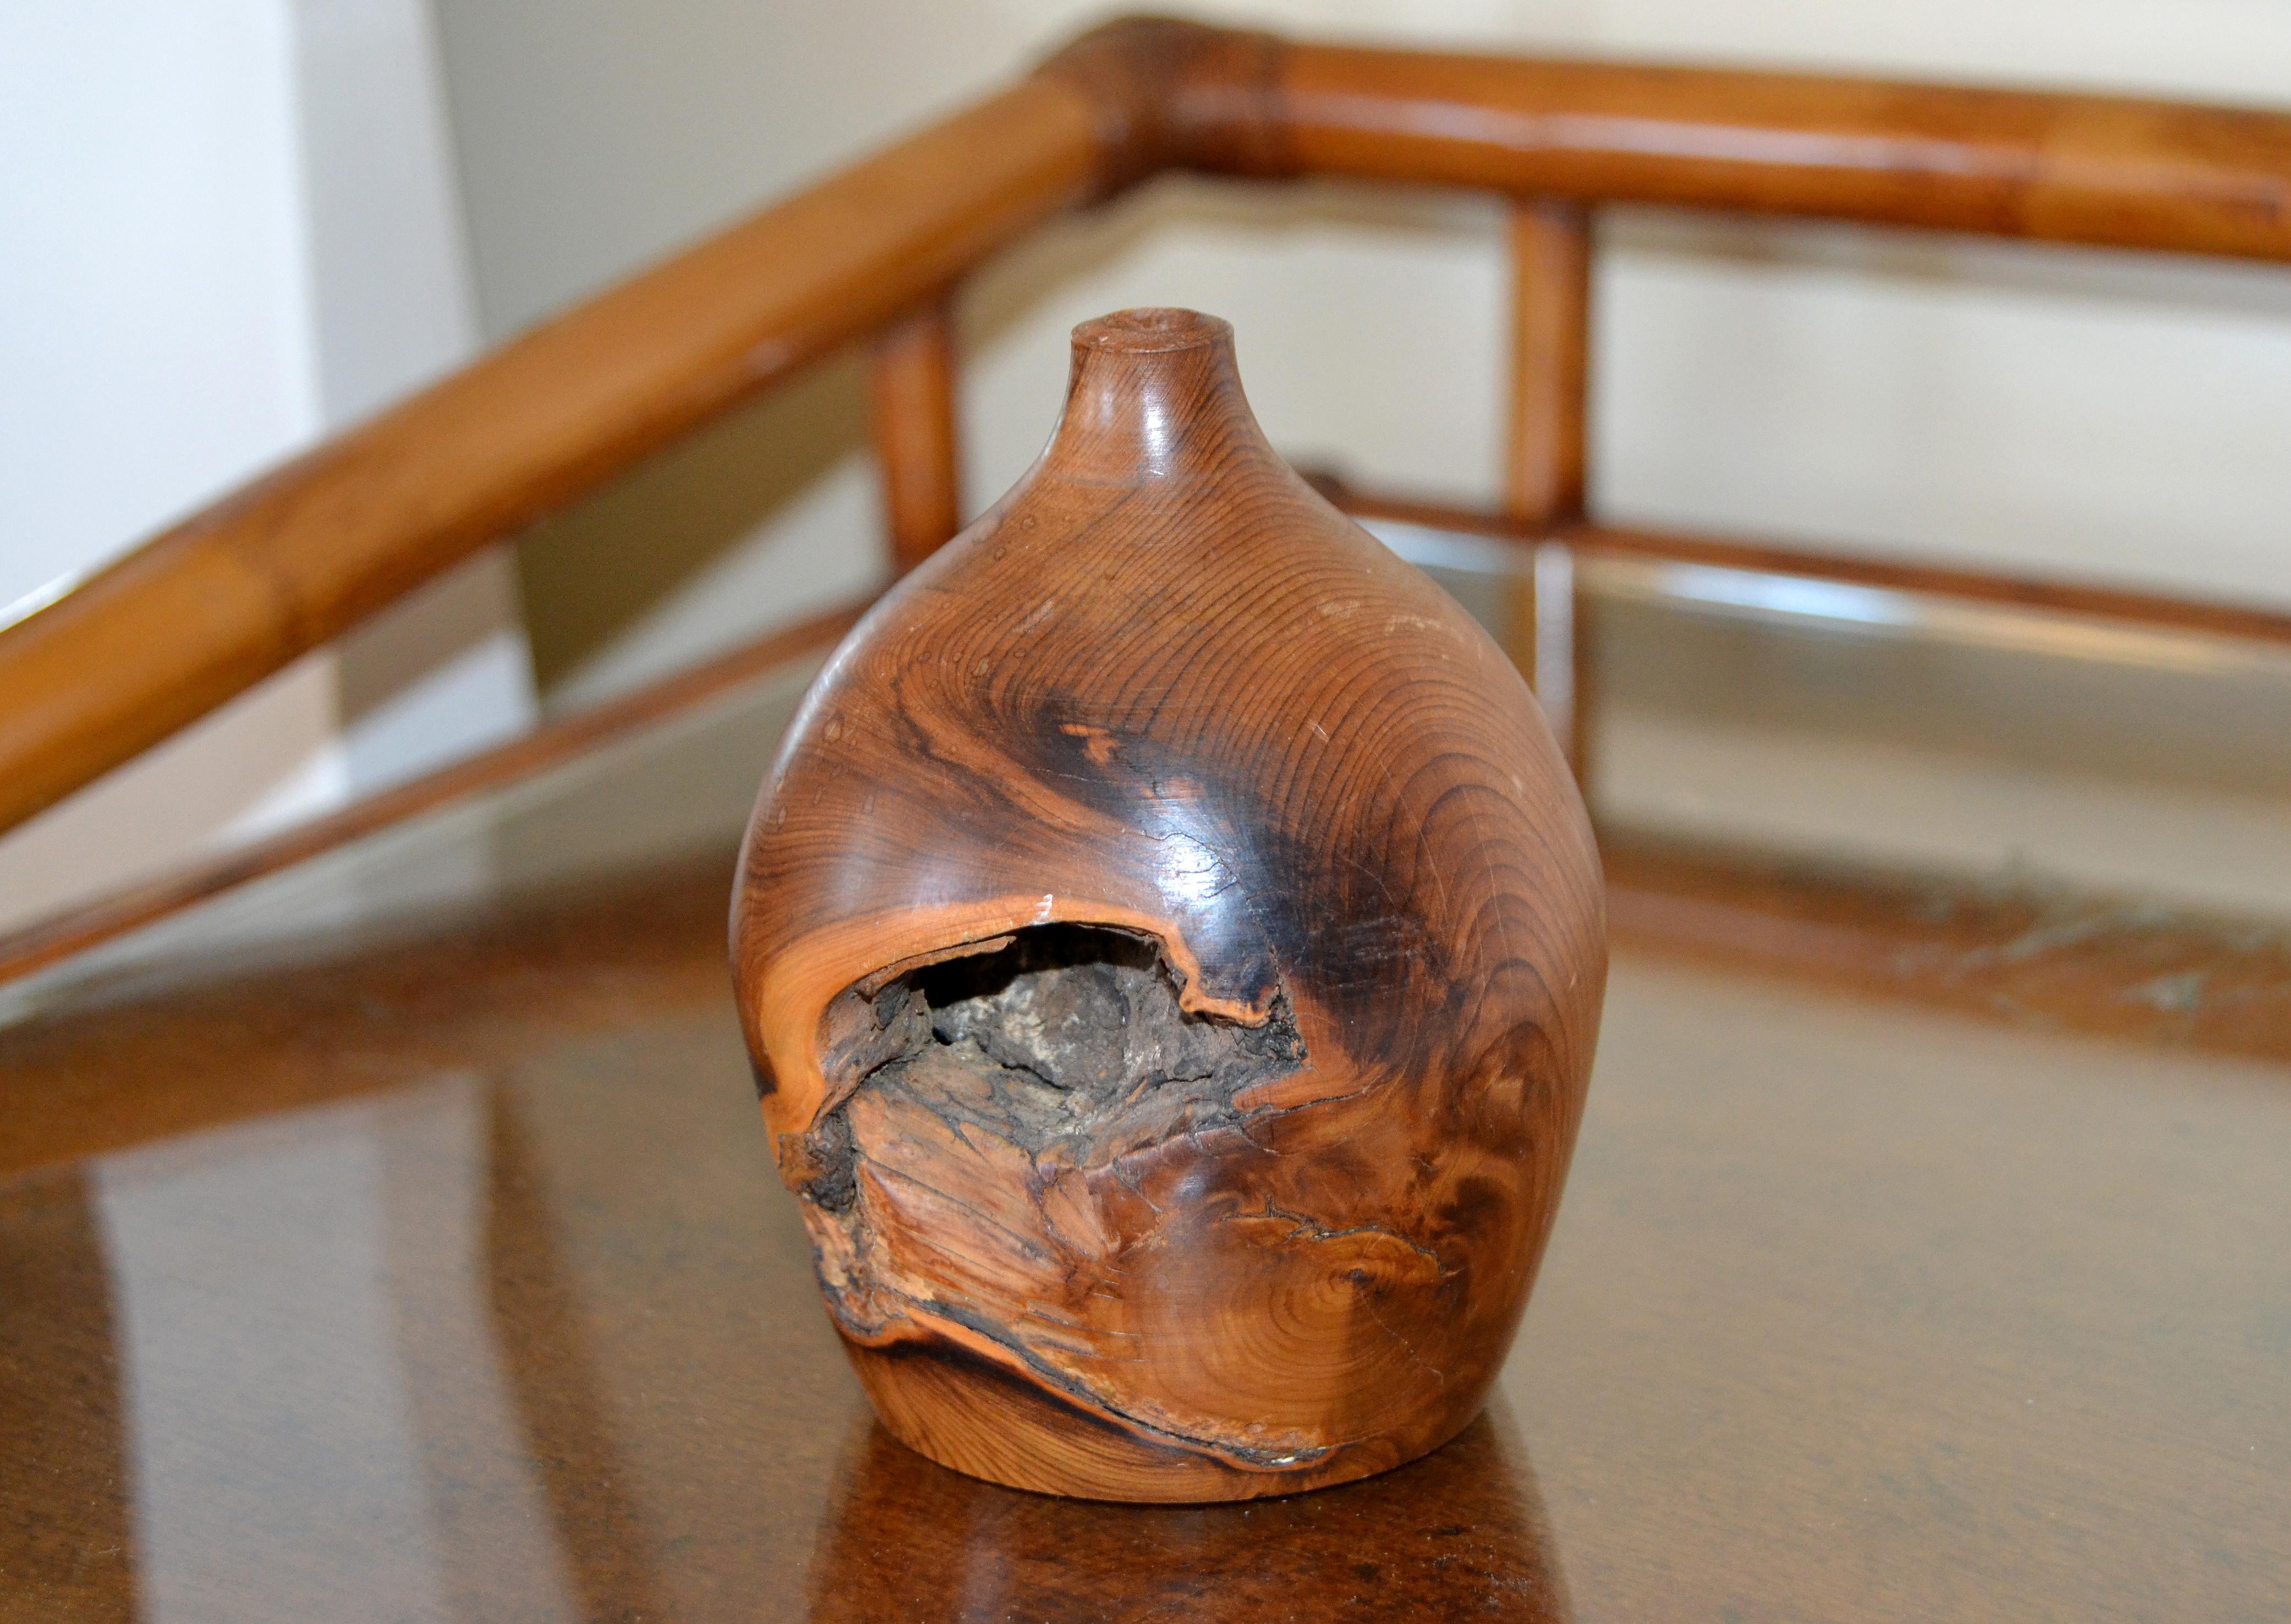 Rustic English Country Handcrafted Cockhill Crafts Sculptural Turned Yew Wood Vase 1960